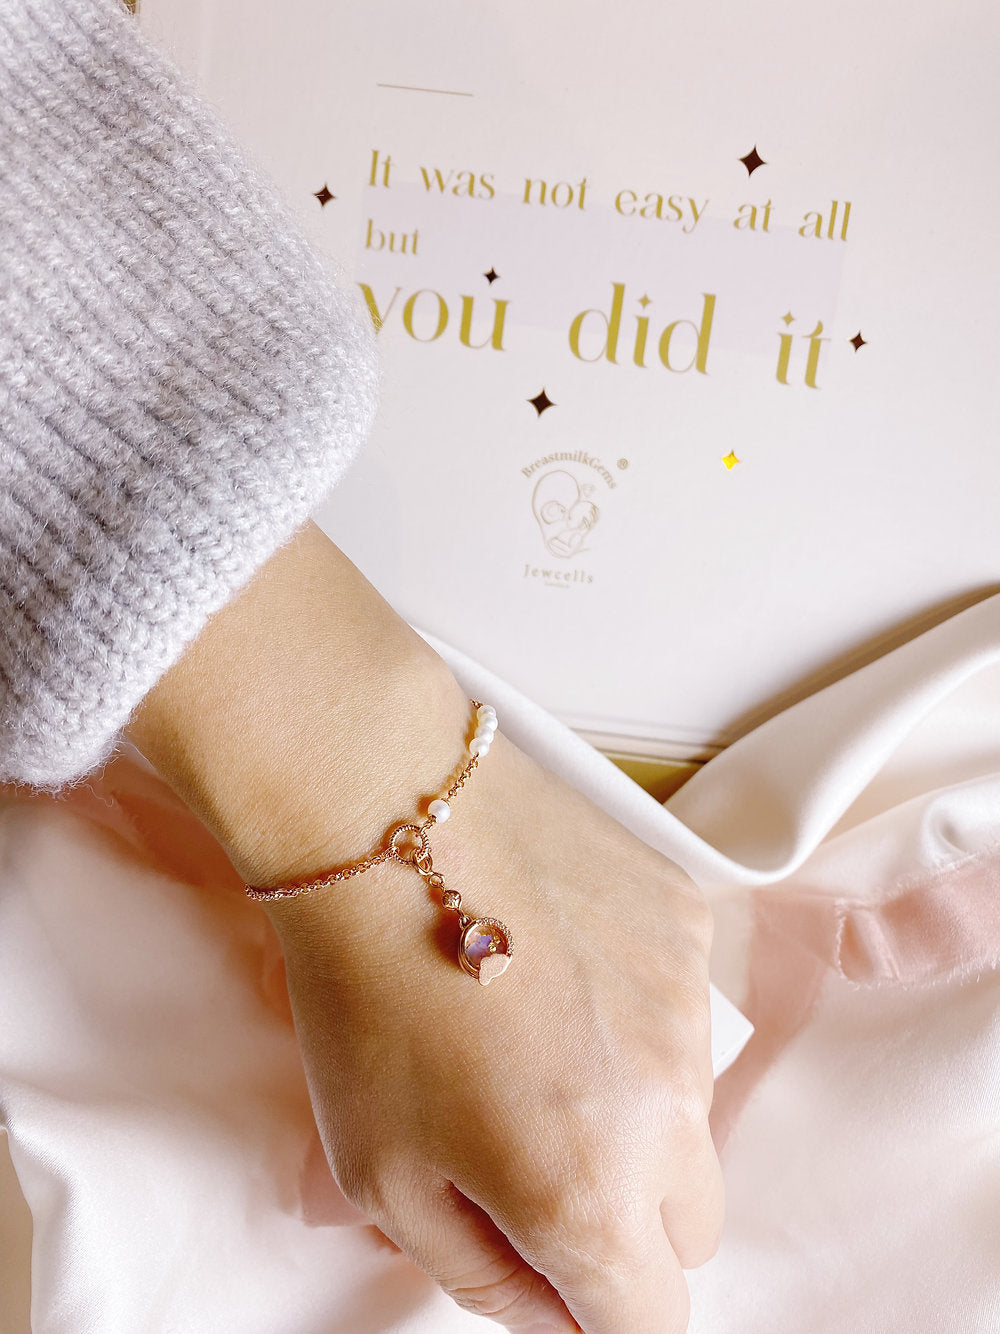 Love of Life Pearl Bracelet with Full Moon Pendant